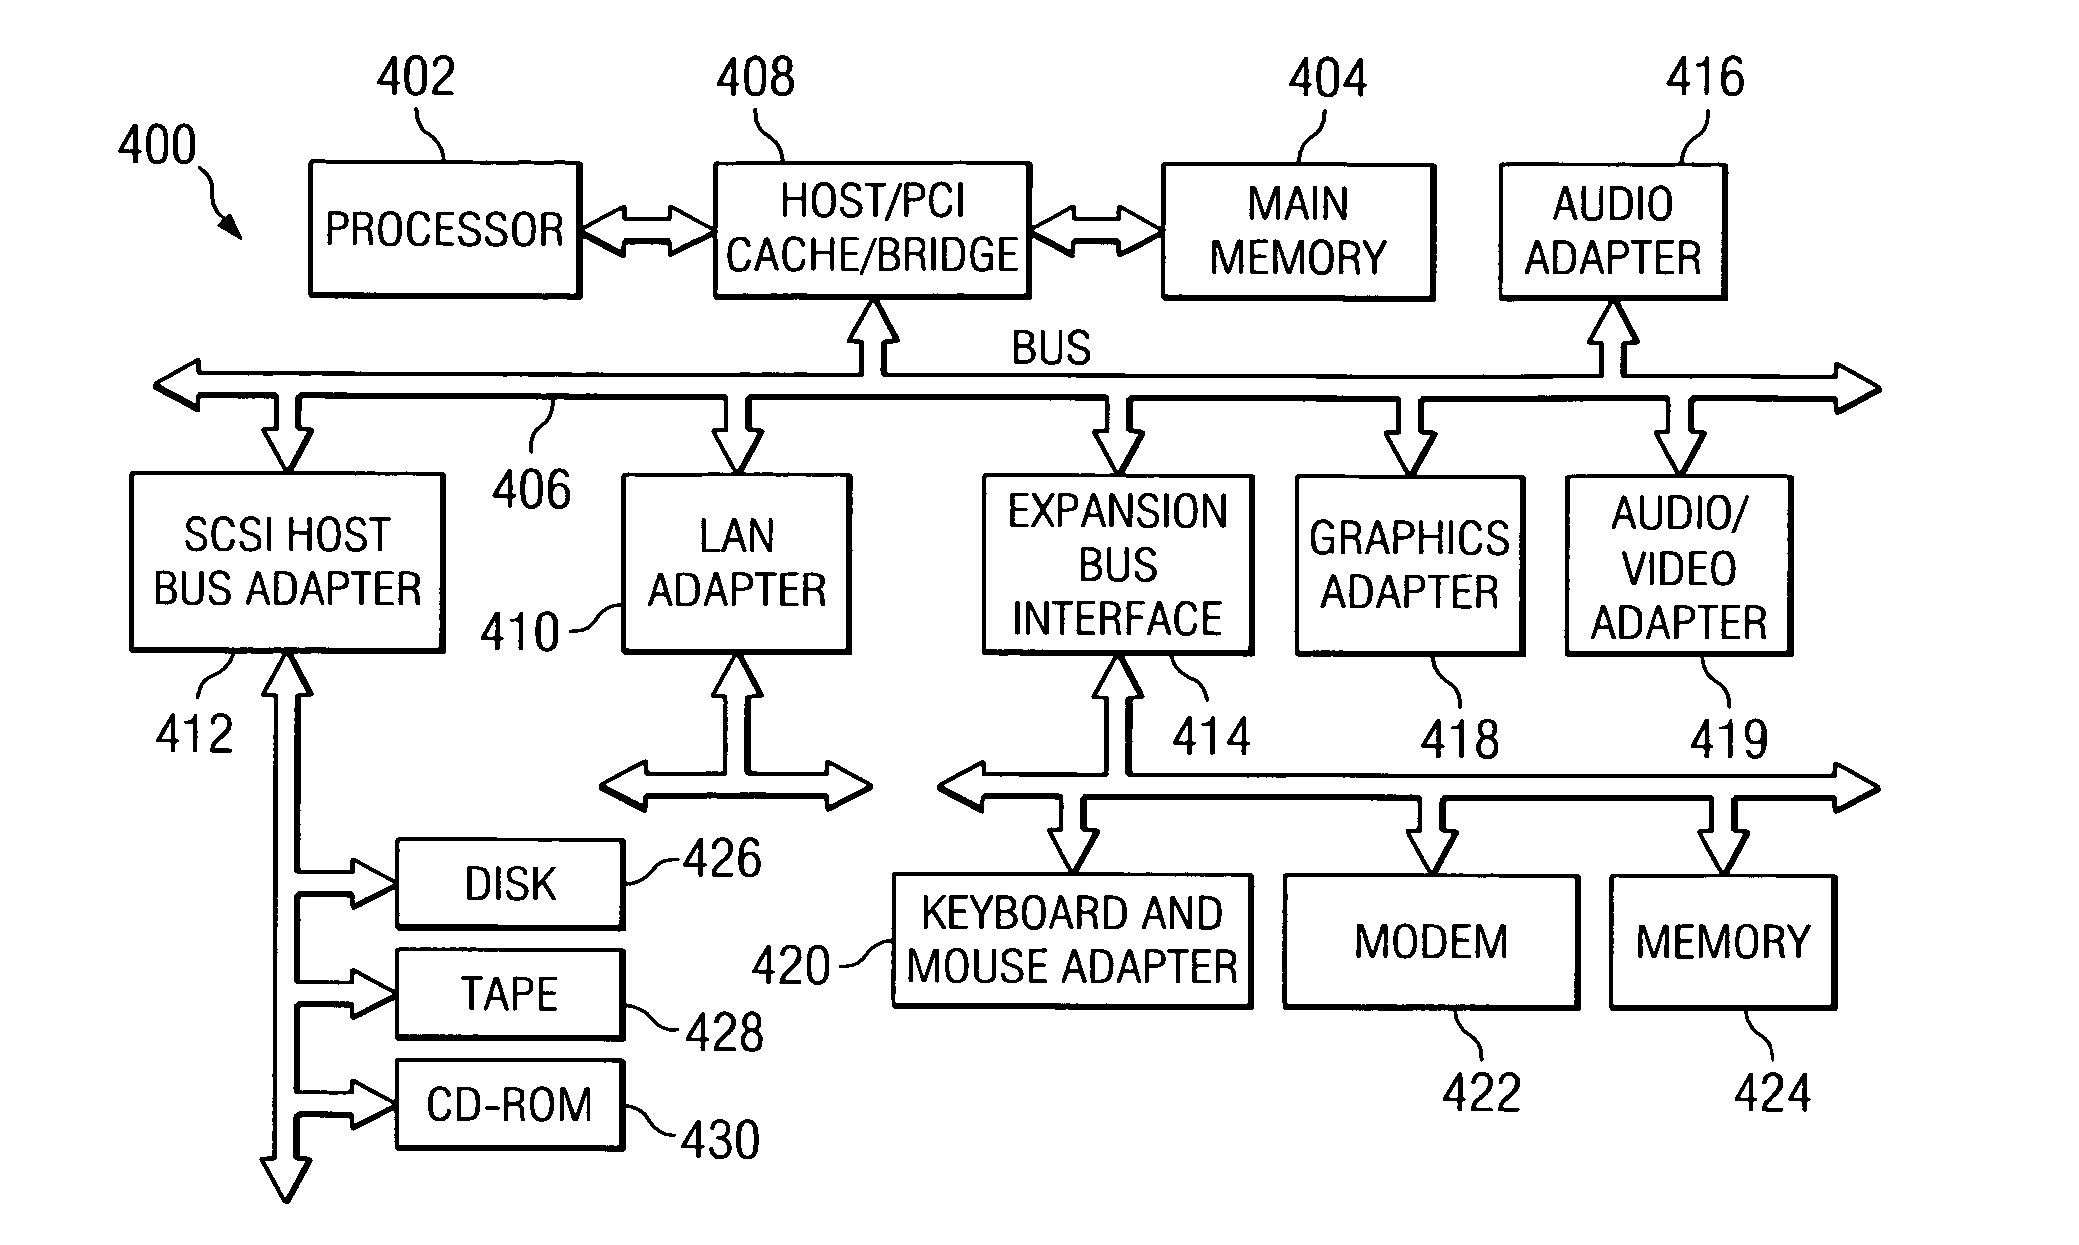 Apparatus and method for allocating resources based on service level agreement predictions and associated costs